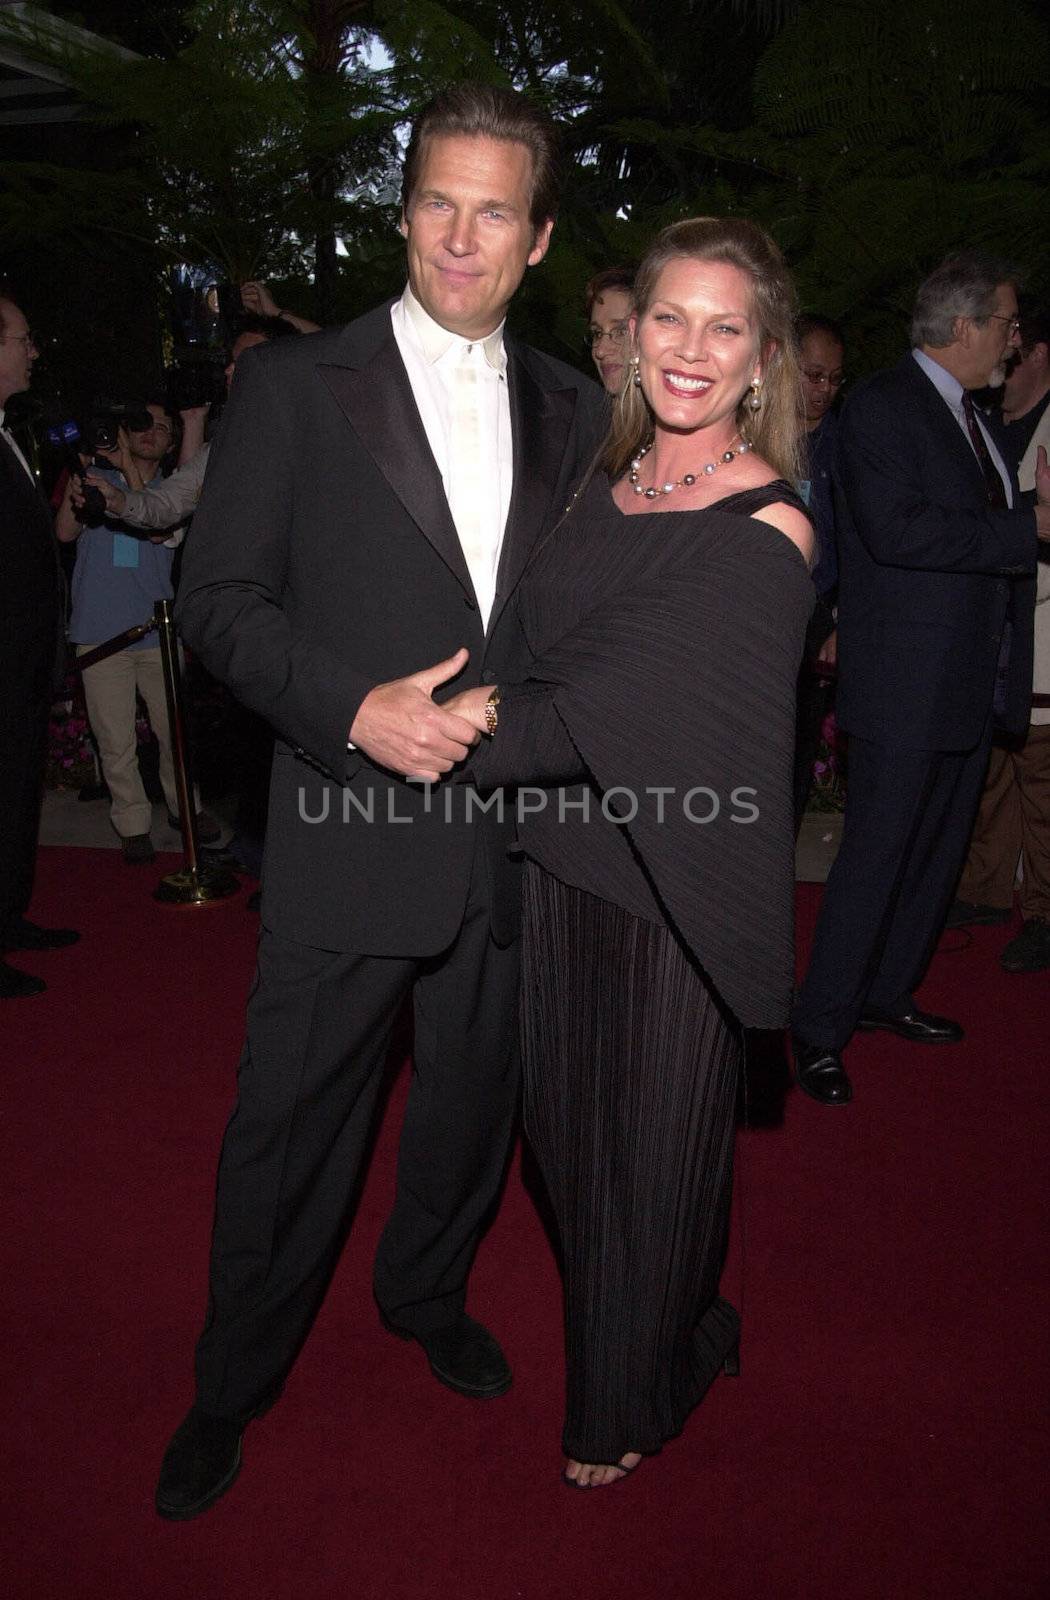 Jeff Bridges and wife Susan at the 4th Annual Raul Julia Ending Hunger Fund Benefit, Beverly Hills, 04-30-00